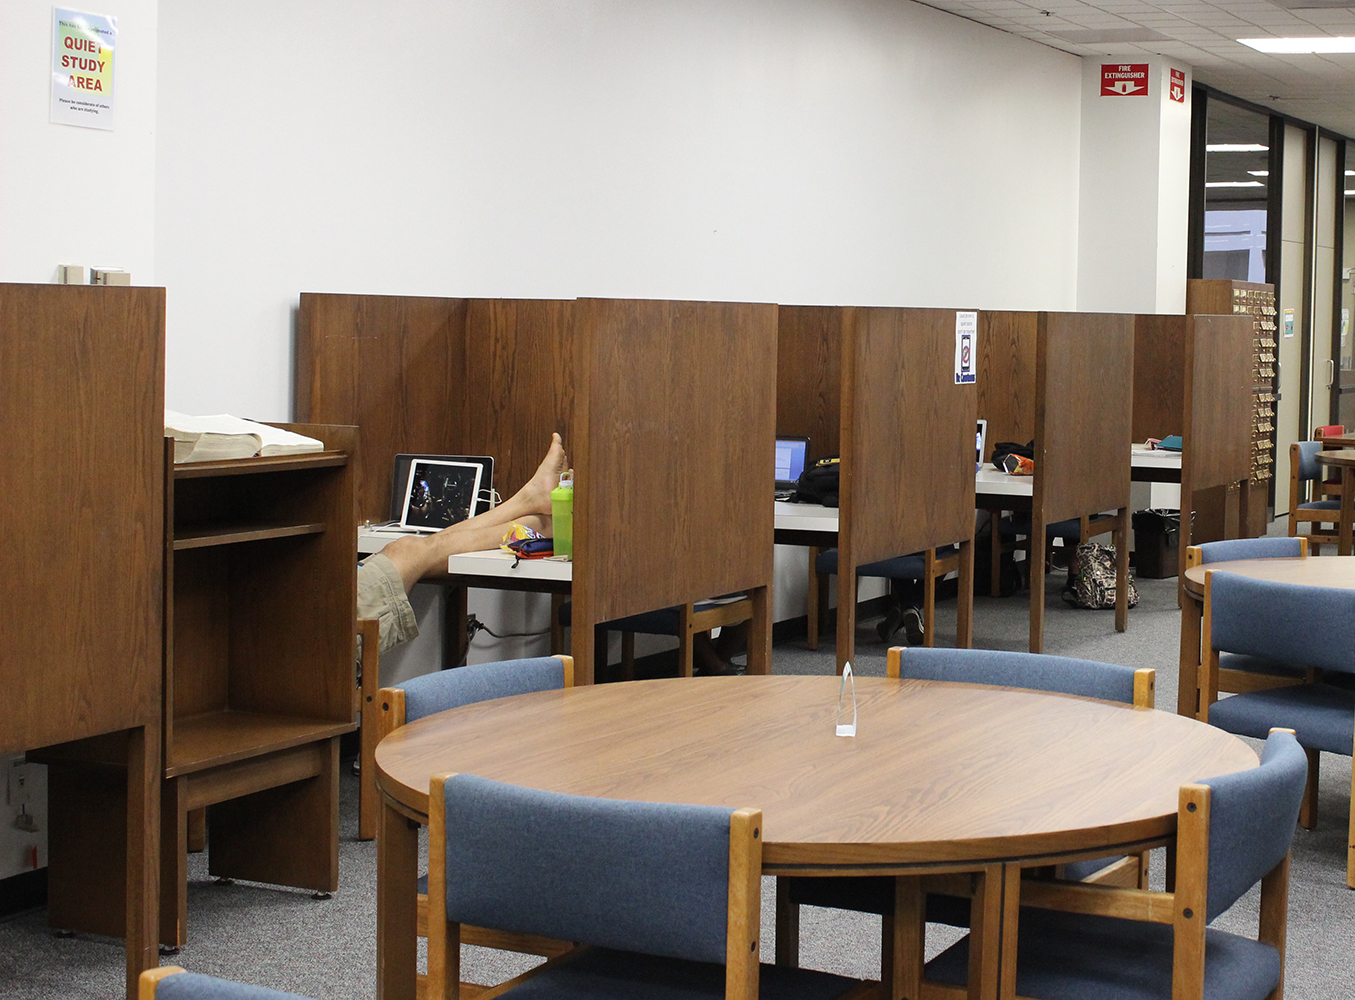 Alfred R. Neumann study area with study desks occupied by students. Photo by The Signal reporter Samantha Rolin.